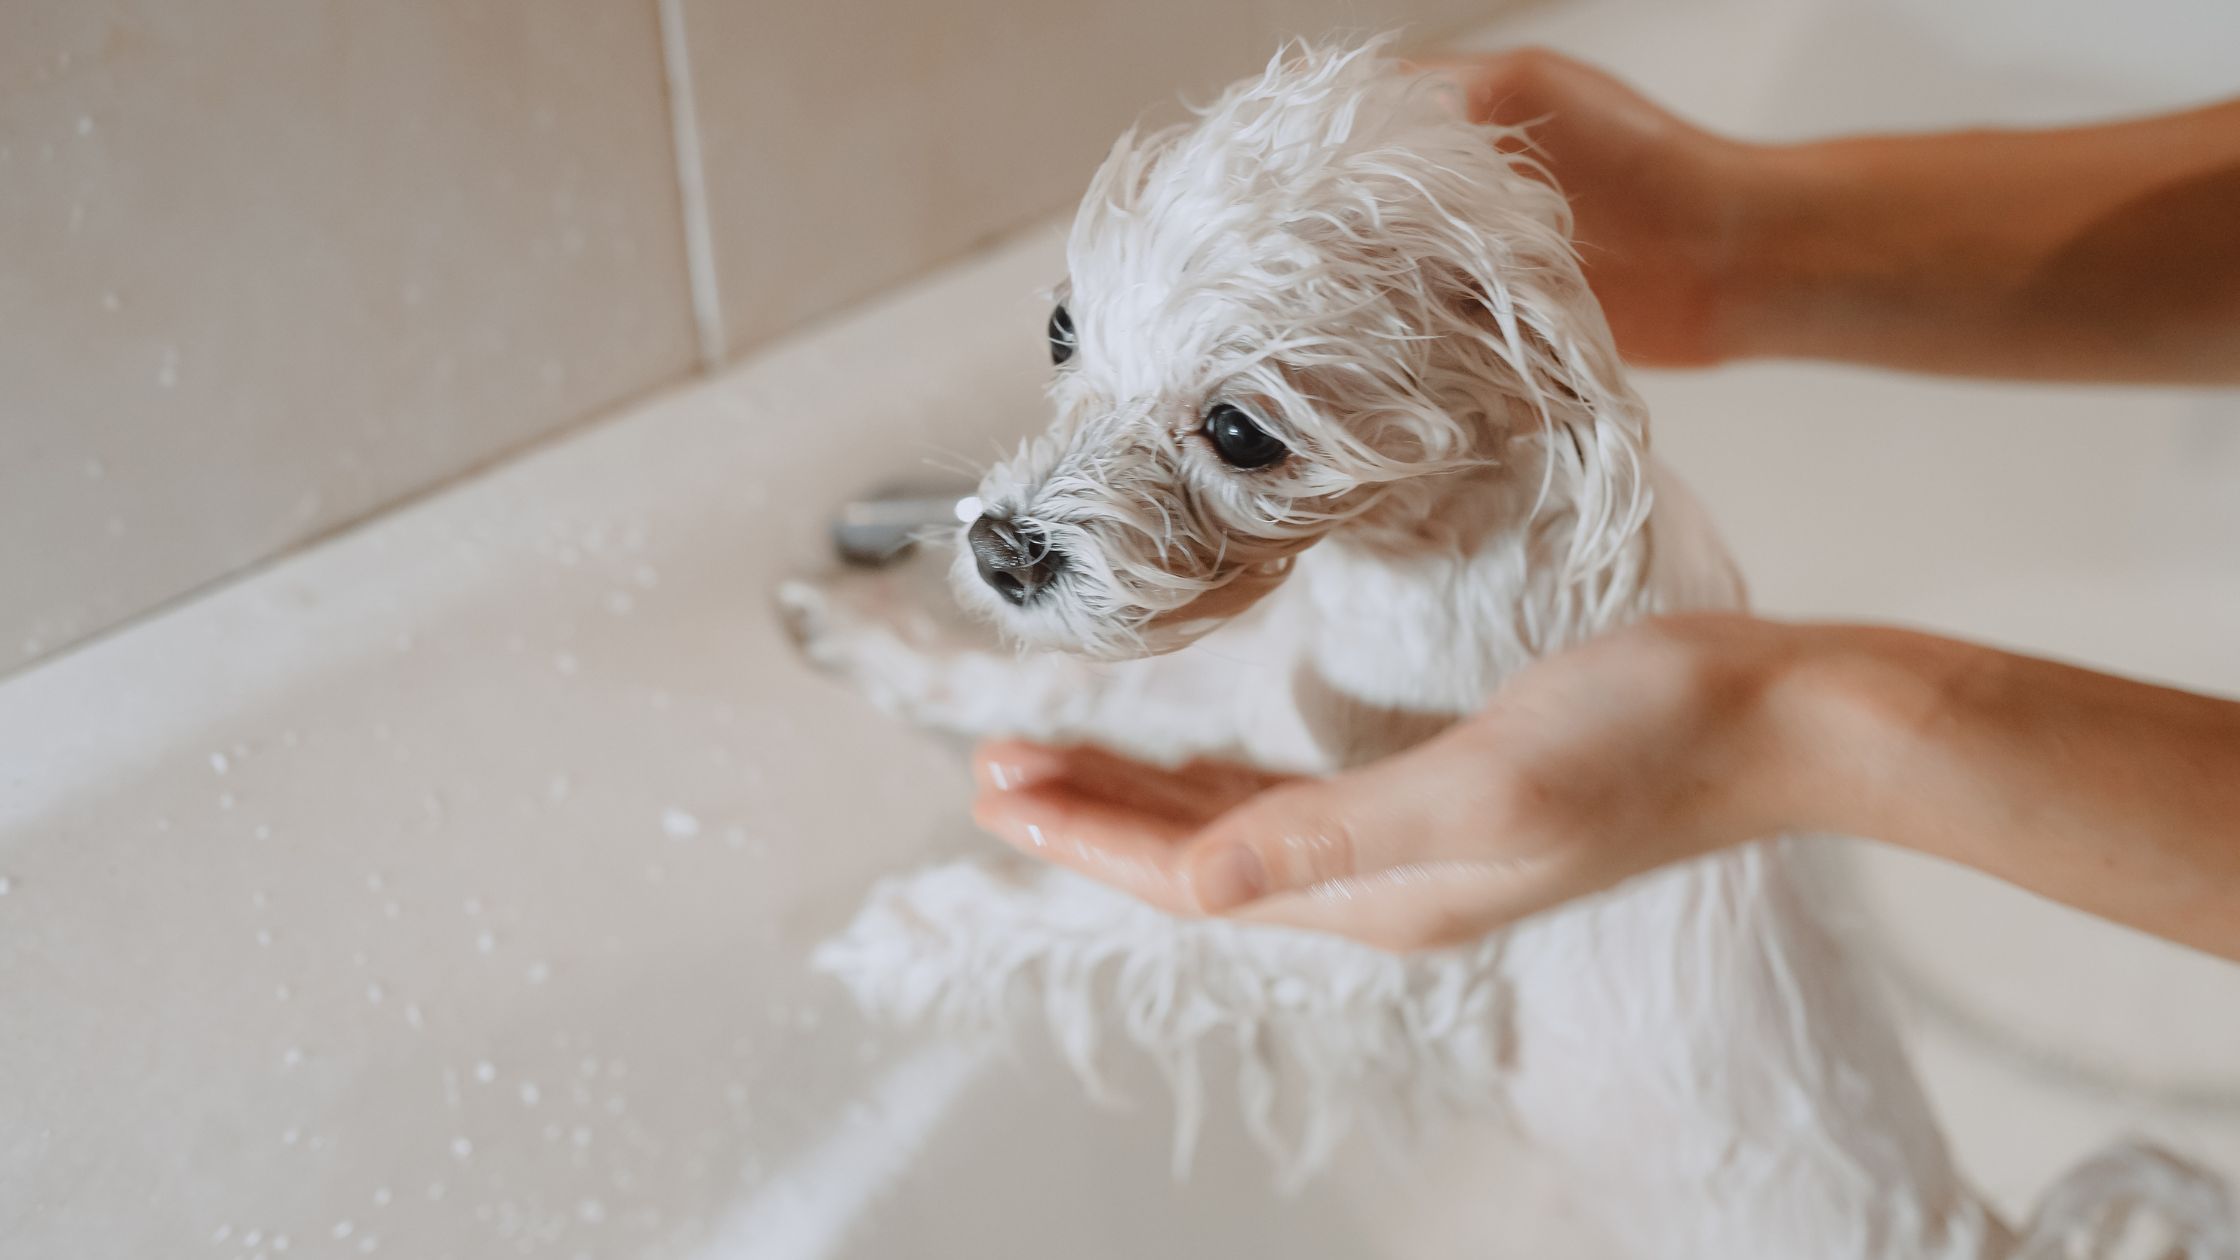 dogs like warm or cold baths